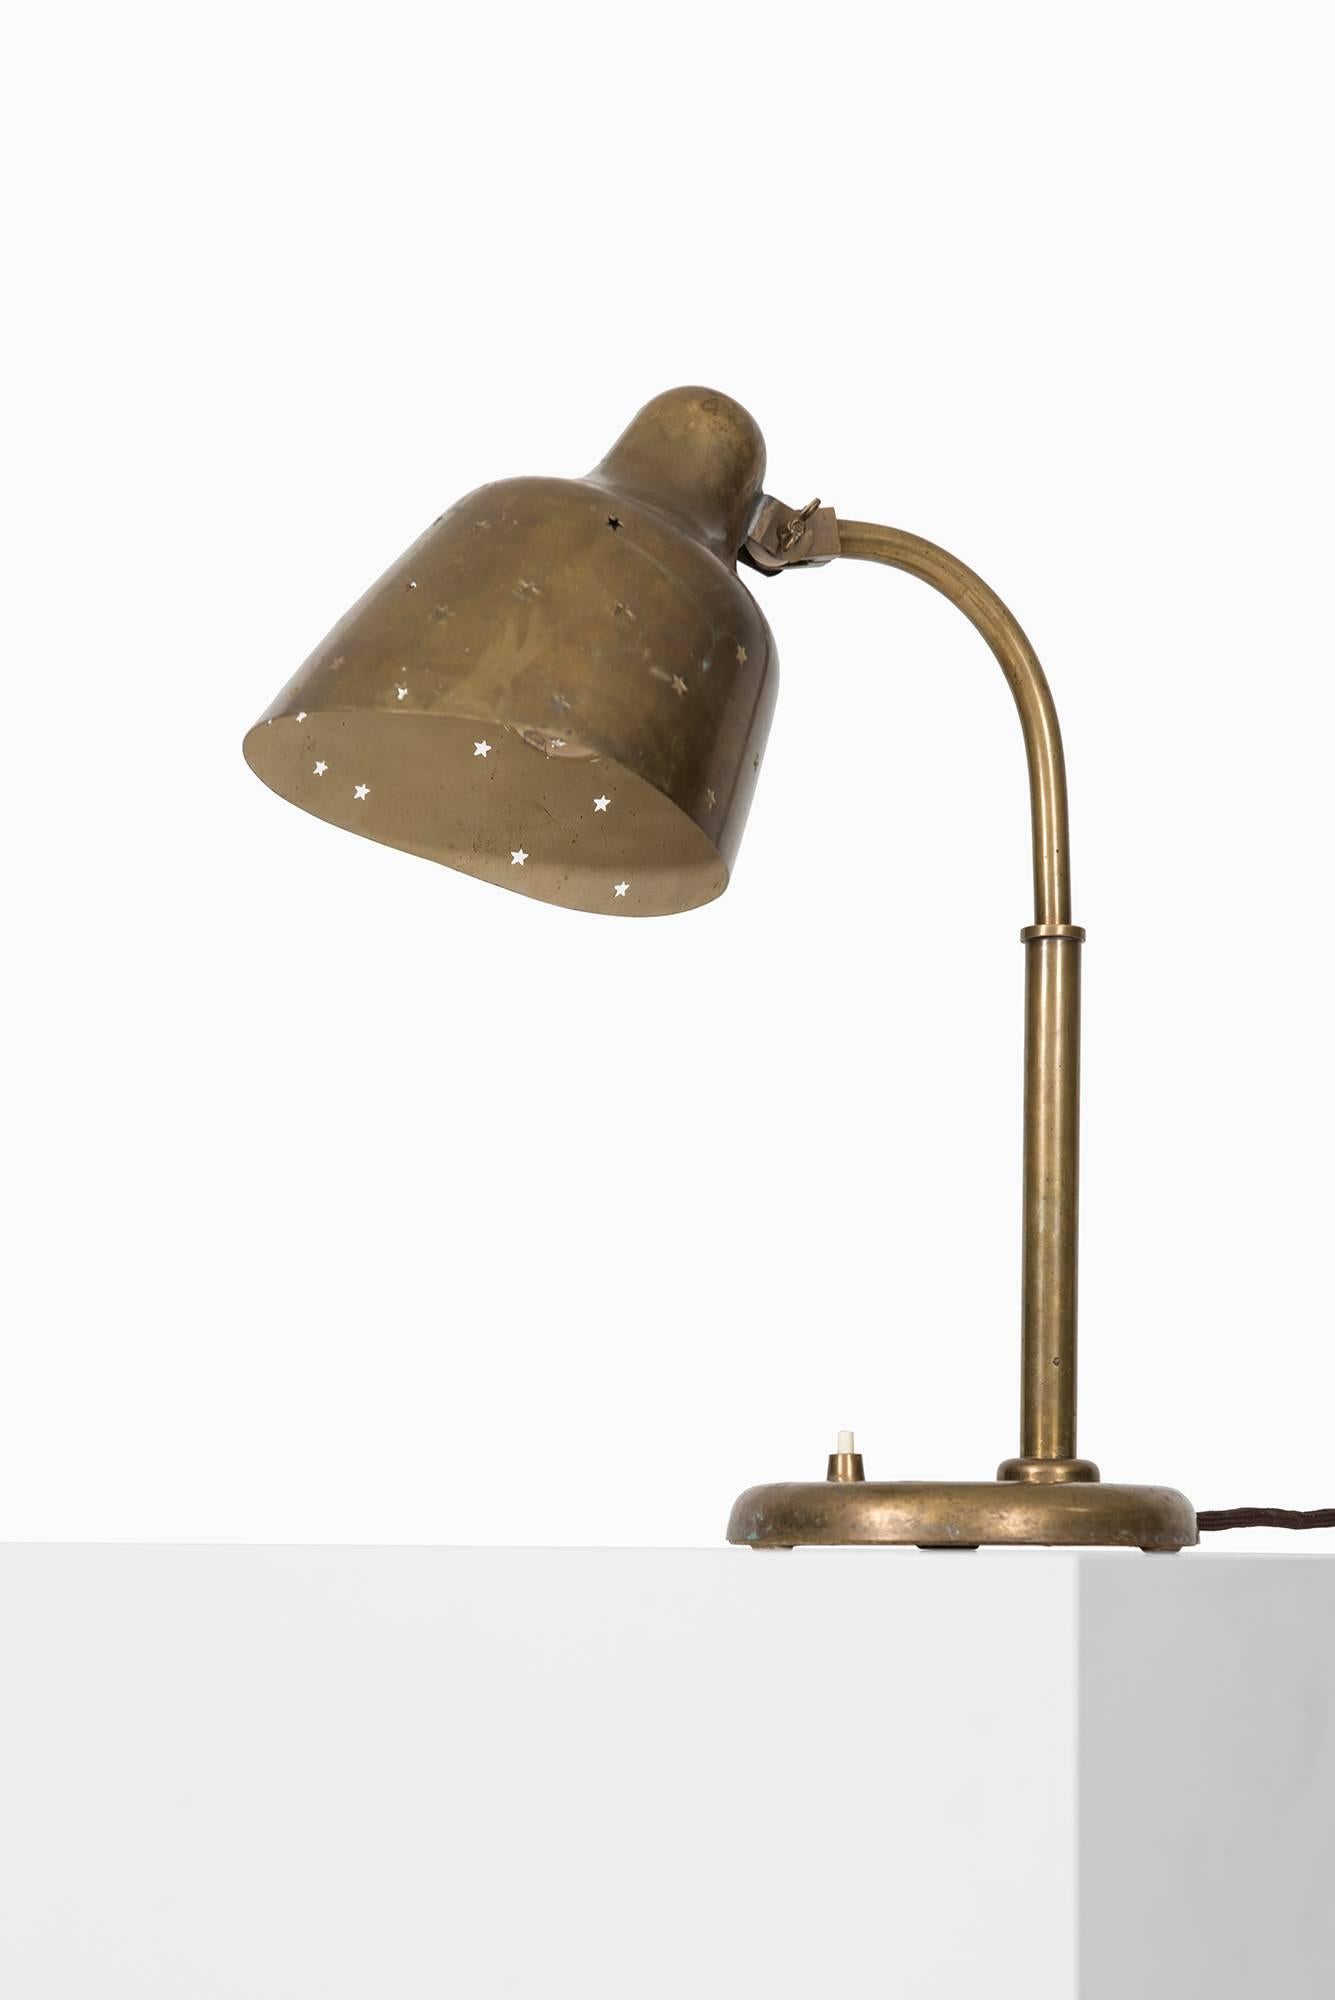 Rare table lamp attributed to Vilhelm Lauritzen. Produced in Denmark.